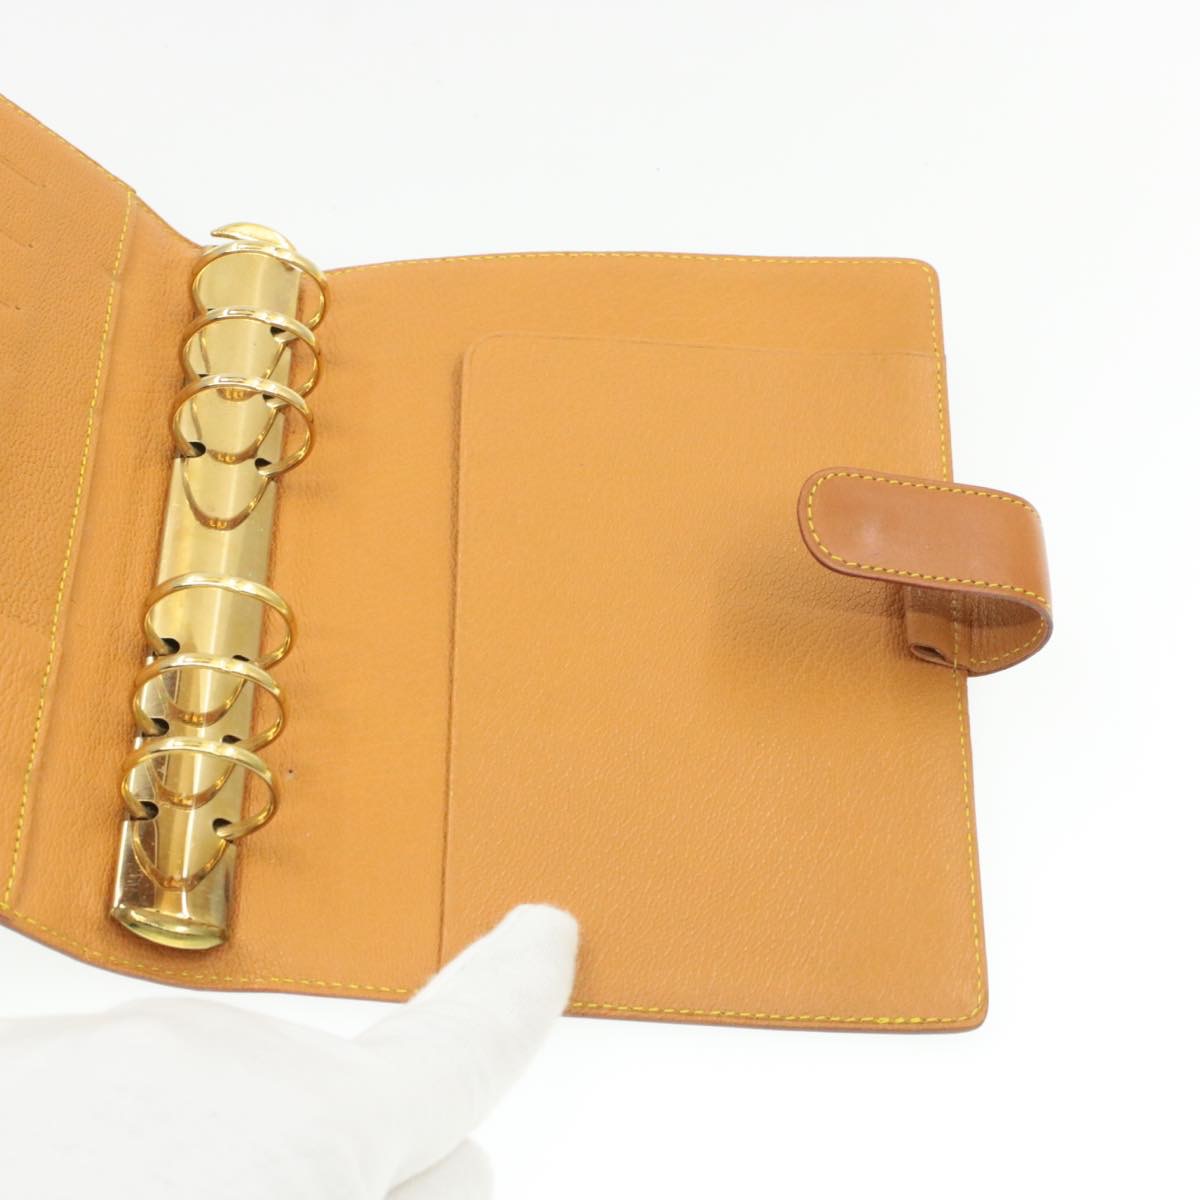 LOUIS VUITTON Nomade Agenda MM Day Planner Cover Camel R20473 LV Auth 16430 | eBay